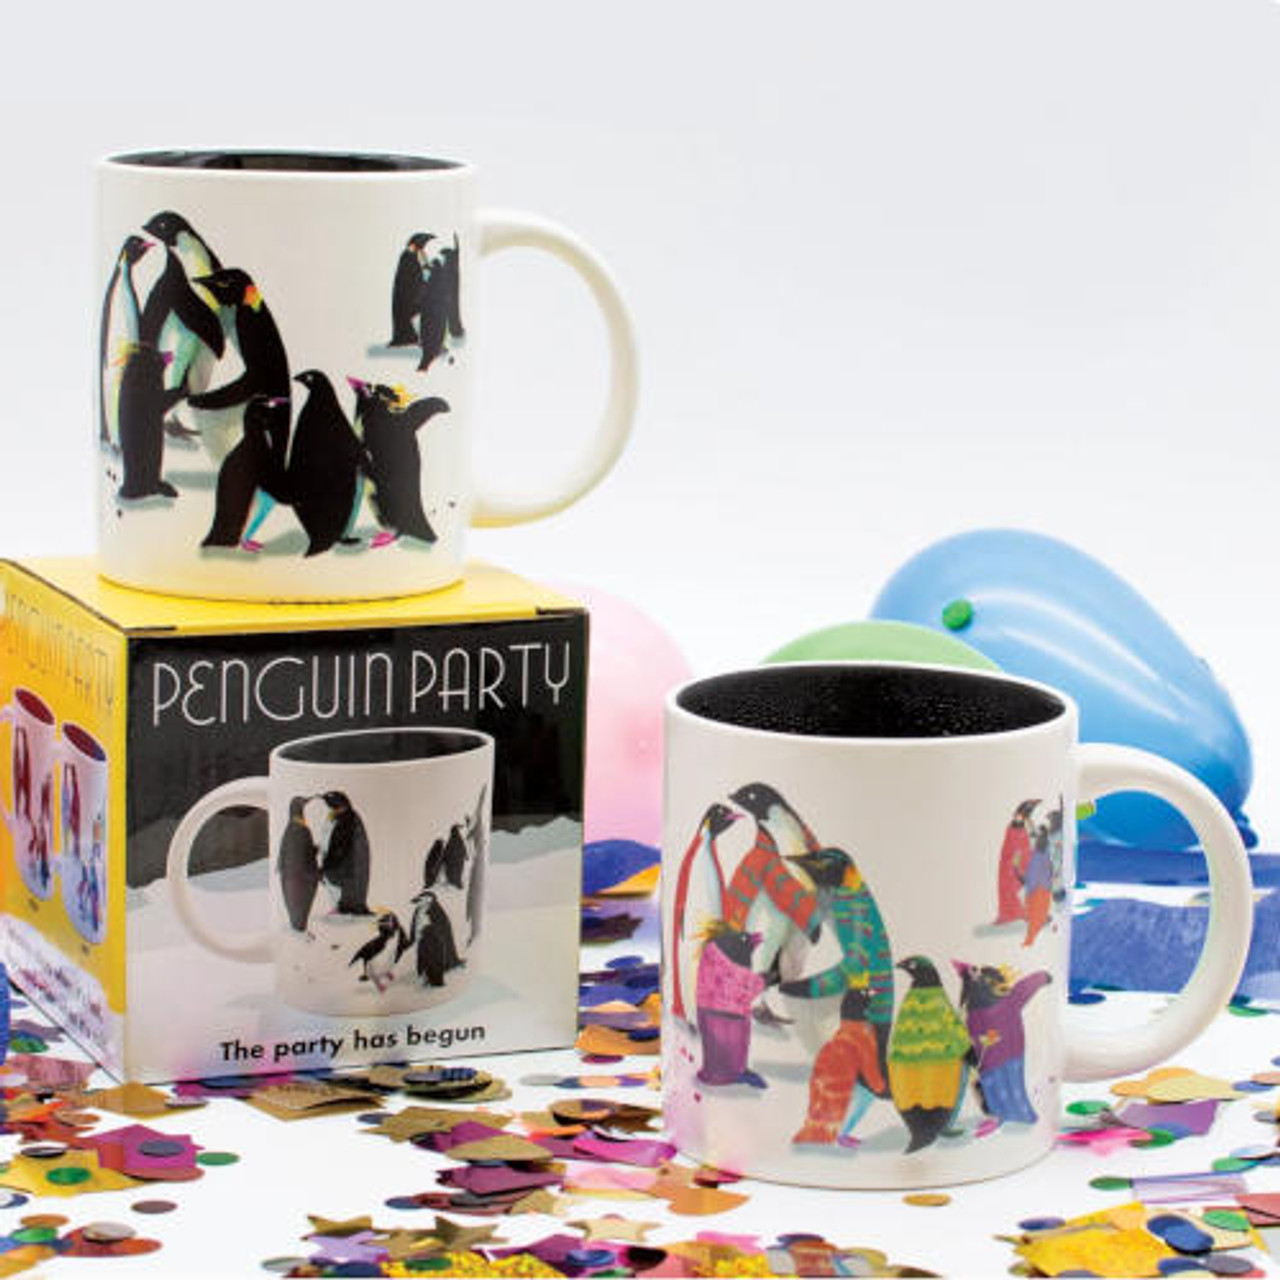 42 Of The Most Creative Cup And Mug Designs Ever - Page 26 of 42 - SooPush